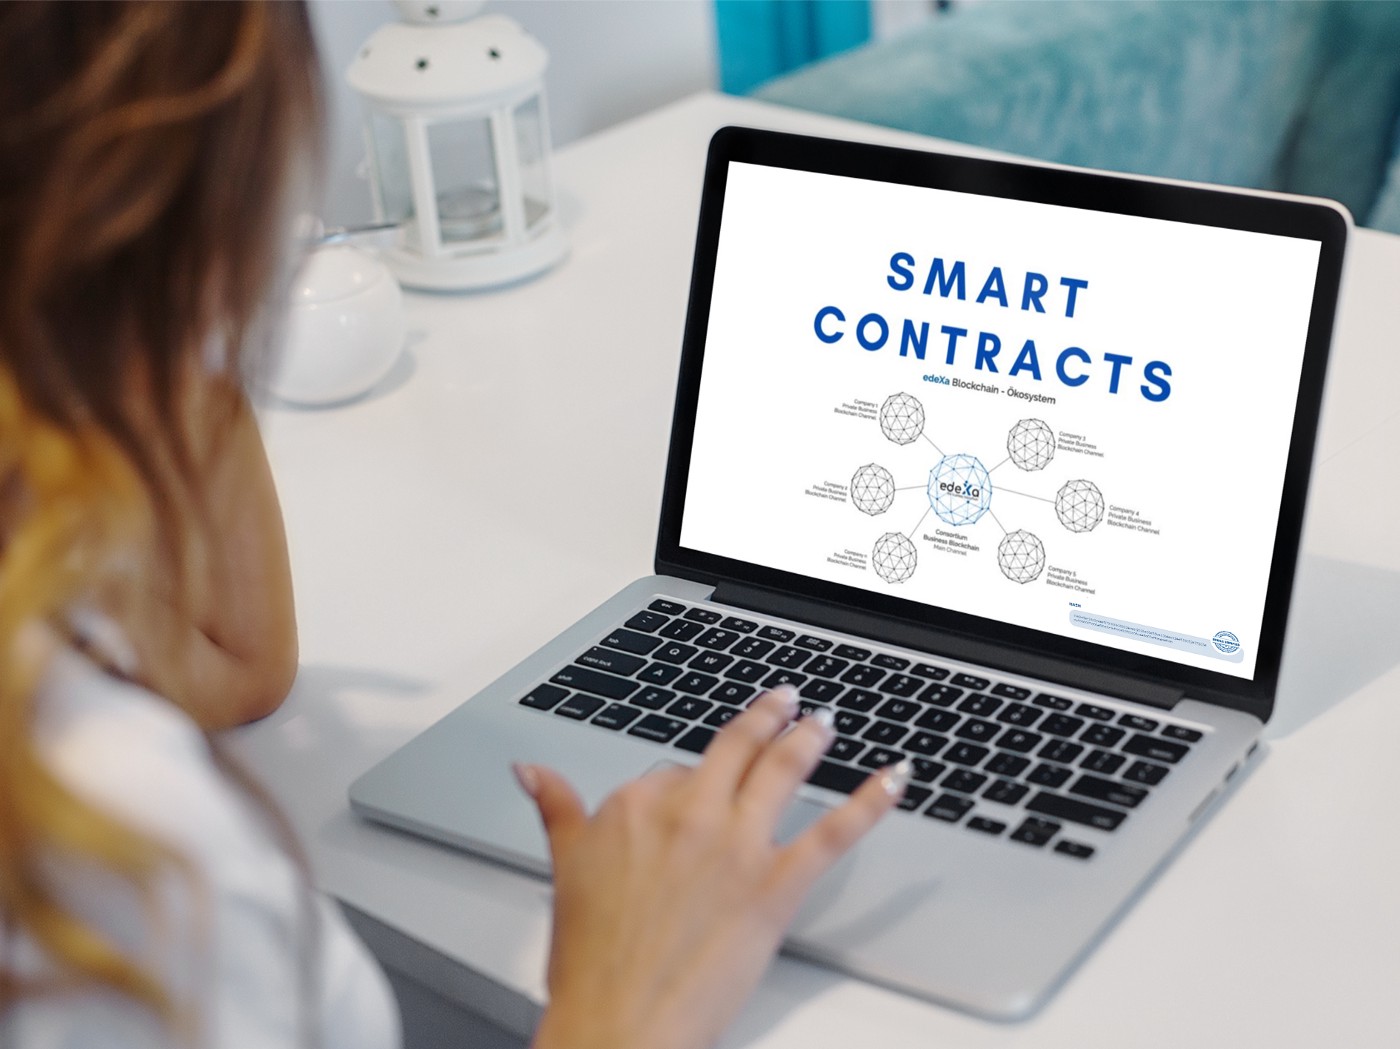 What was blockchain again and what exactly are smart contracts?